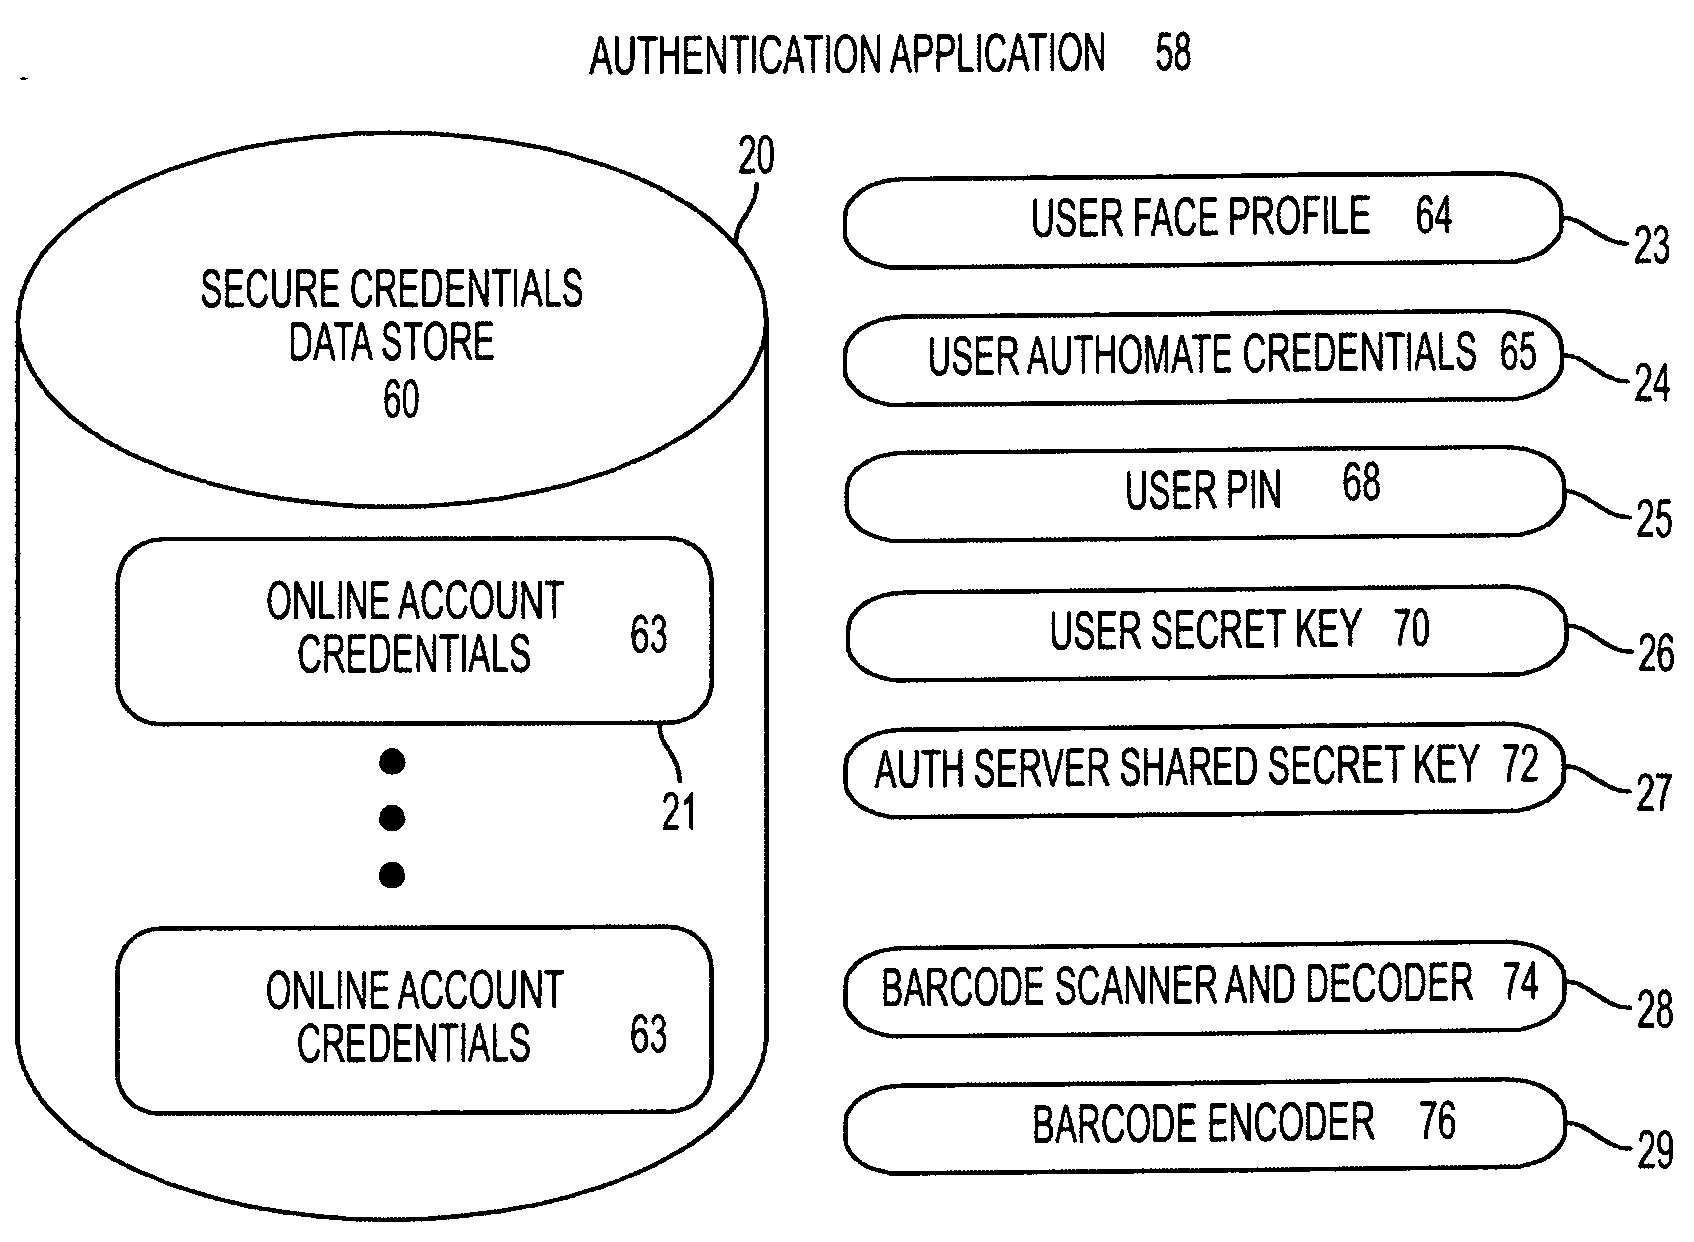 System, design and process for easy to use credentials management for online accounts using out-of-band authentication